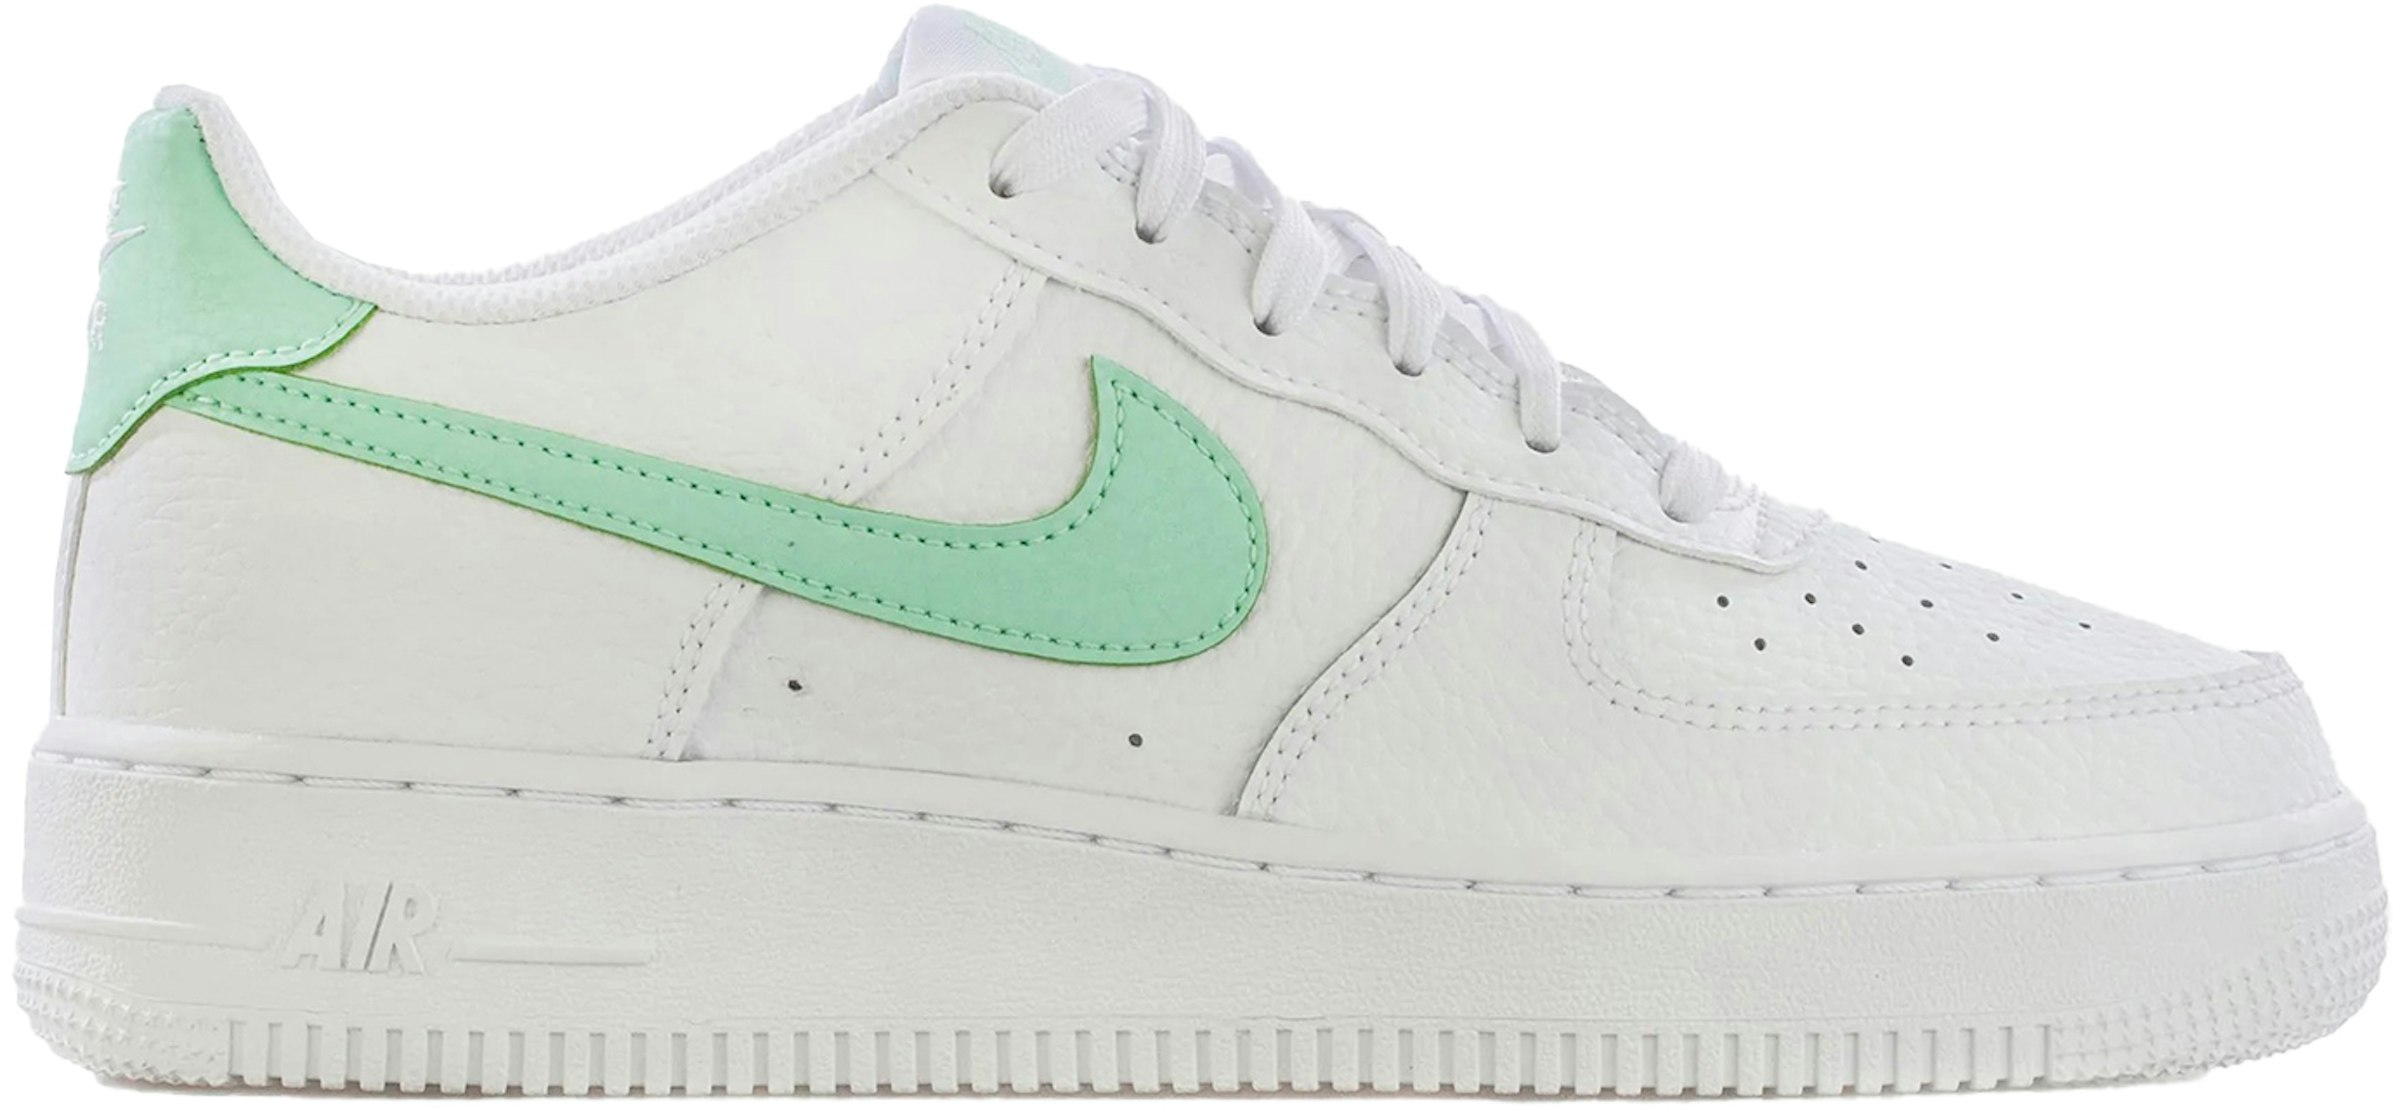 fantoom overdrijving Puno Nike Air Force 1 Low Mint Swoosh (GS) Kids' - CT3839-105 - US